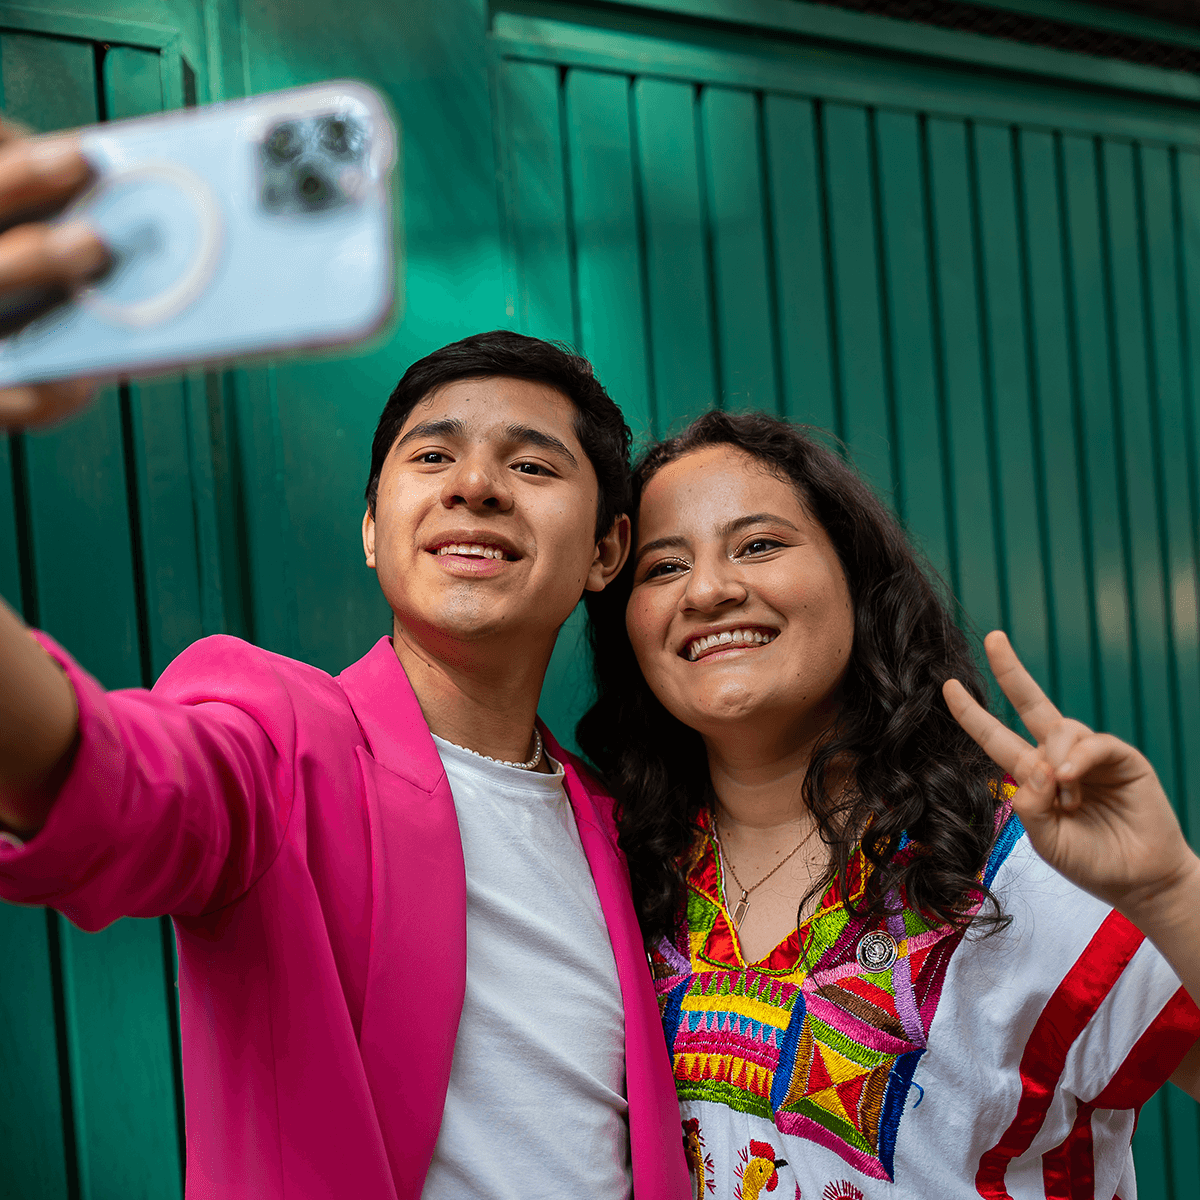 Two people in colorful outfits posing while filming themselves with a smartphone.